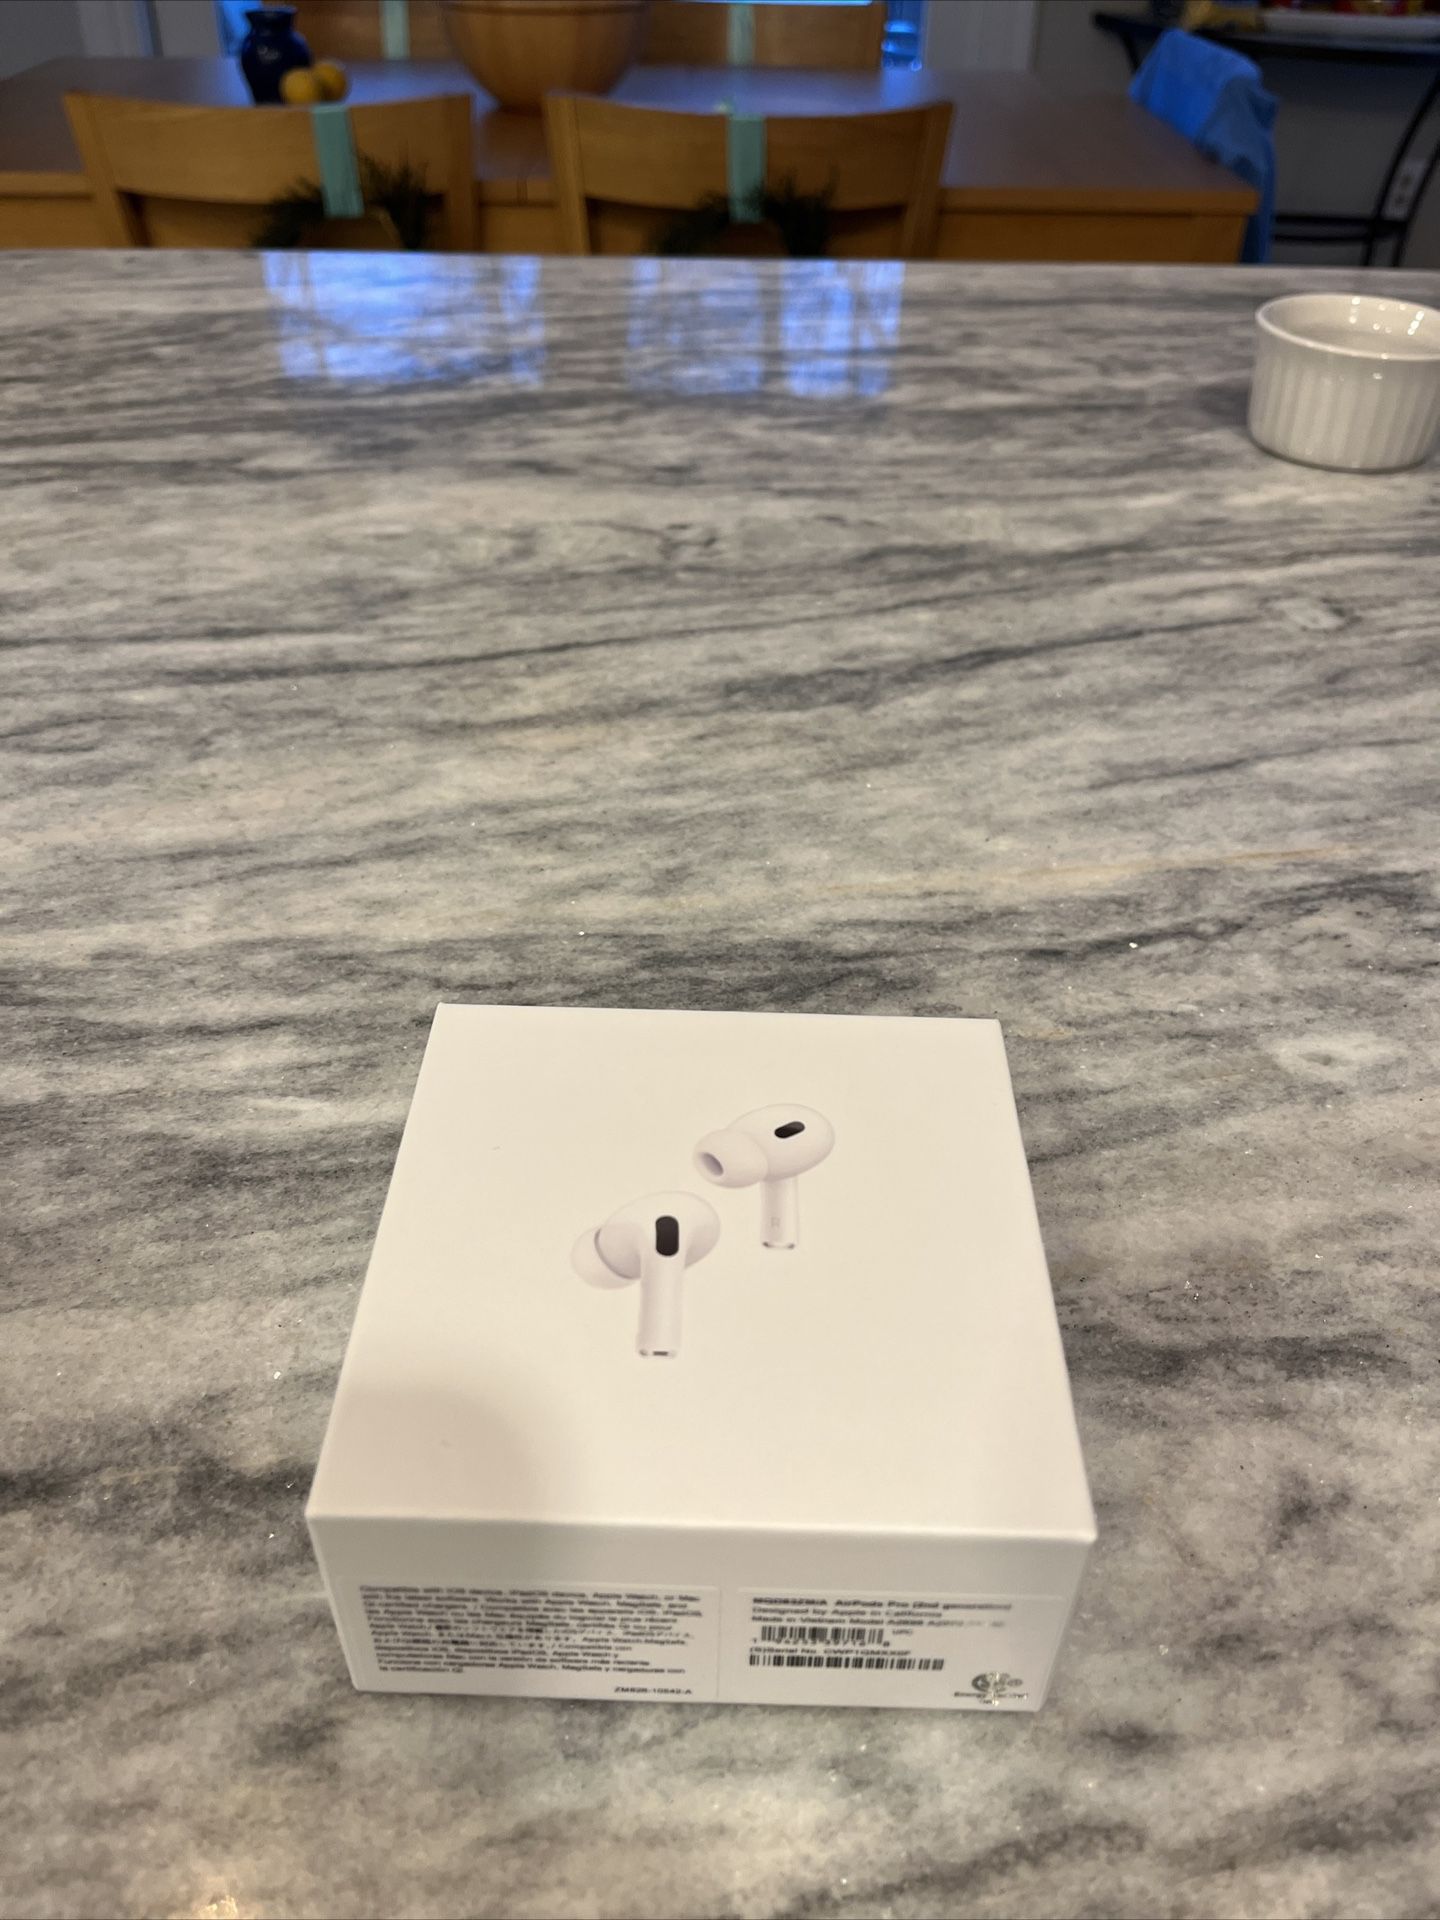 Airpod Pros 2nd Gen With MagSafe (reselling, Parts, Or Personal Use)